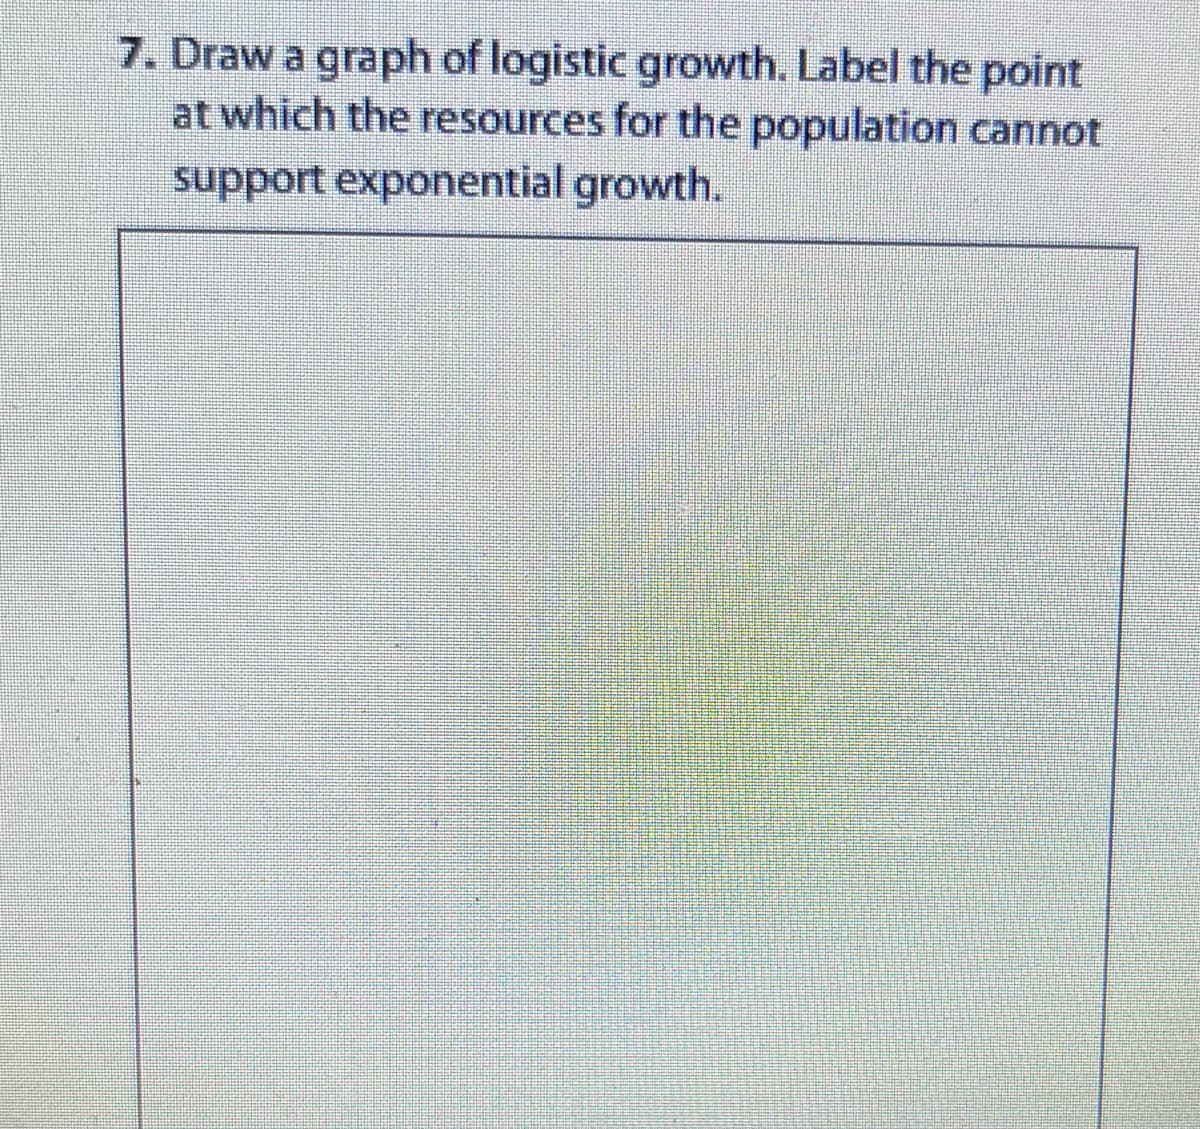 7. Draw a graph of logistic growth. Label the point
at which the resources for the population cannot
support exponential growth.